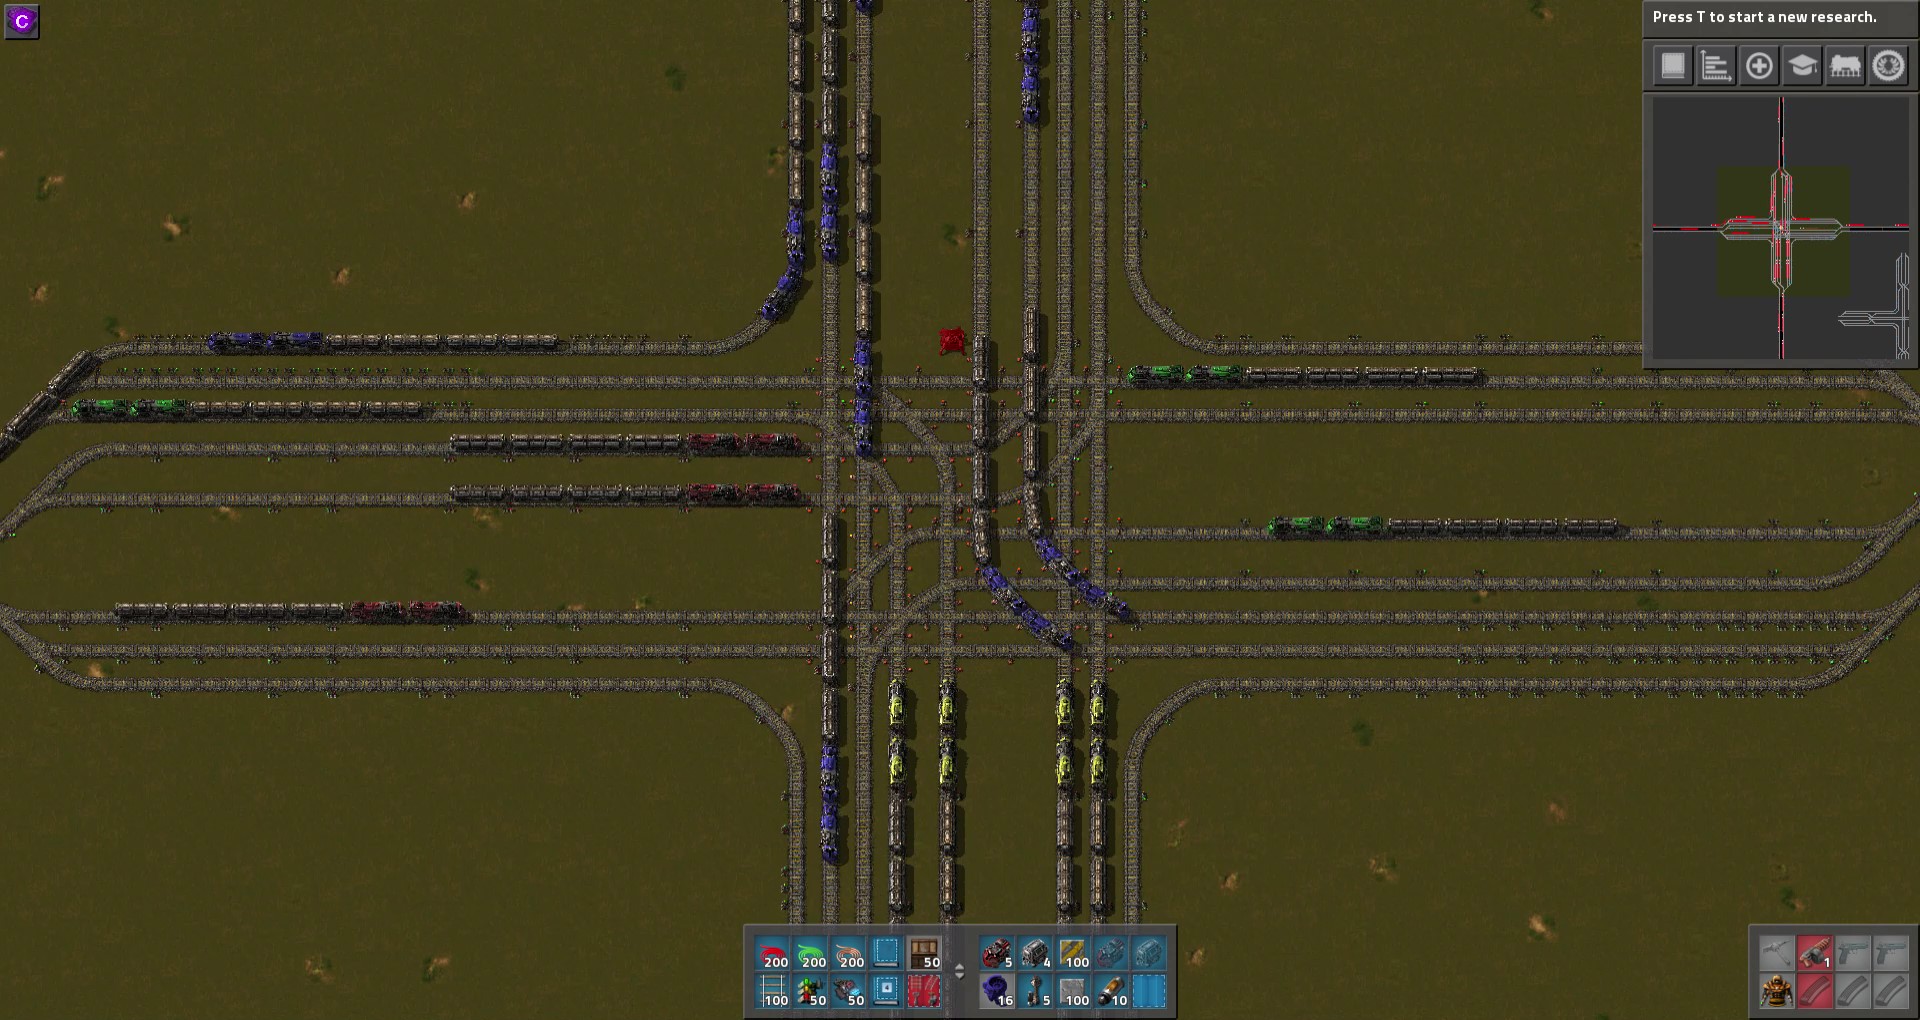 Here is my take on it, Letting as many trains as possible pass the intersection per round, buffering up all the directions. No unnecessary crossings, no U-turns.